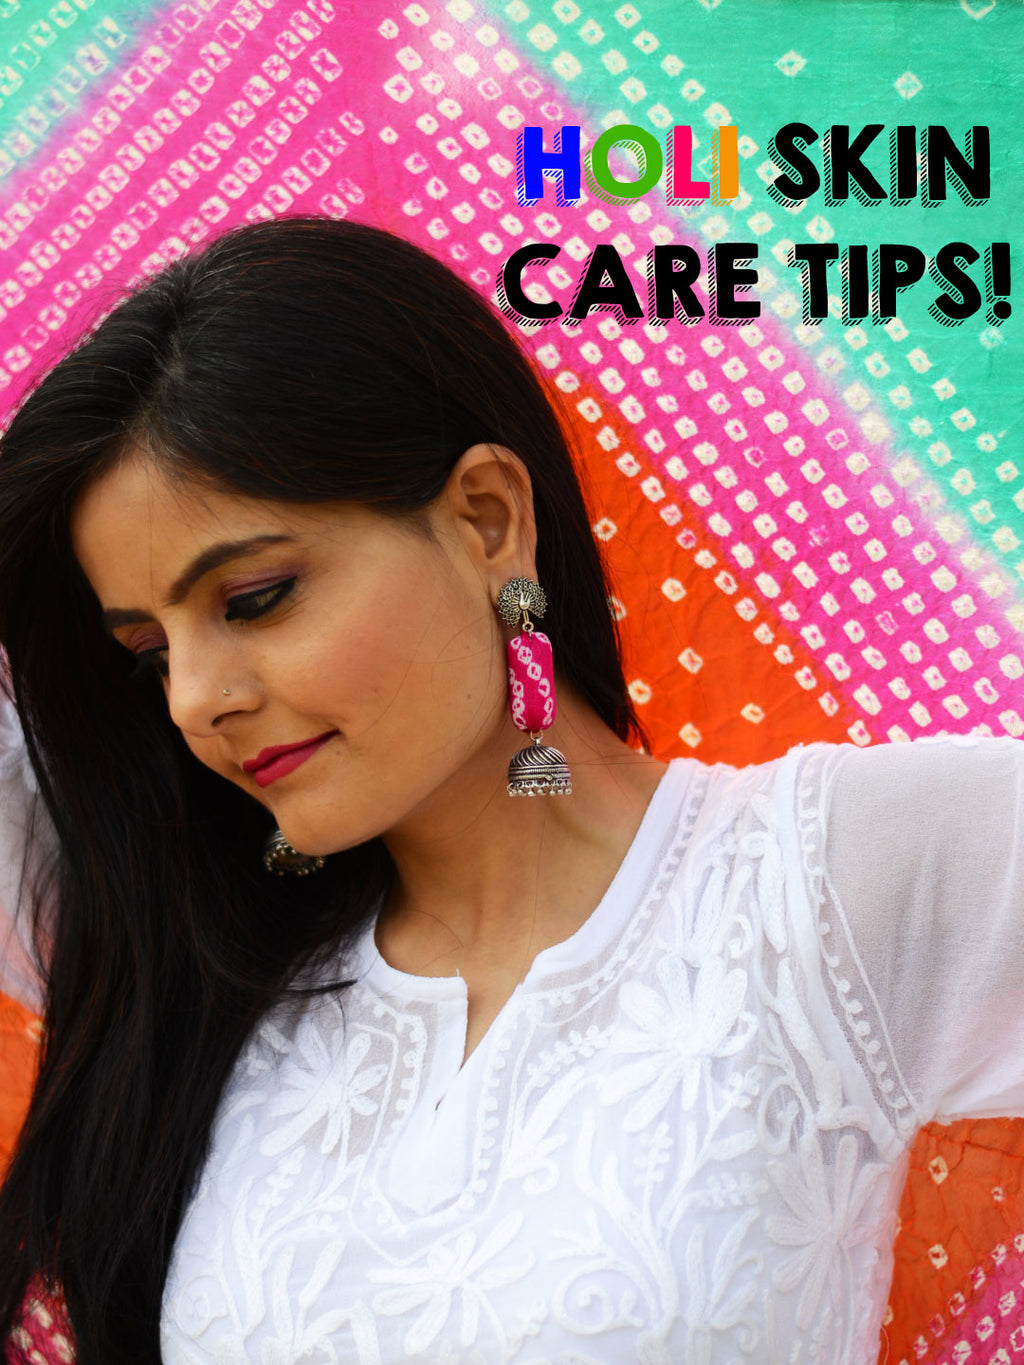 Tips to avoid looking like a horror movie star post Holi!